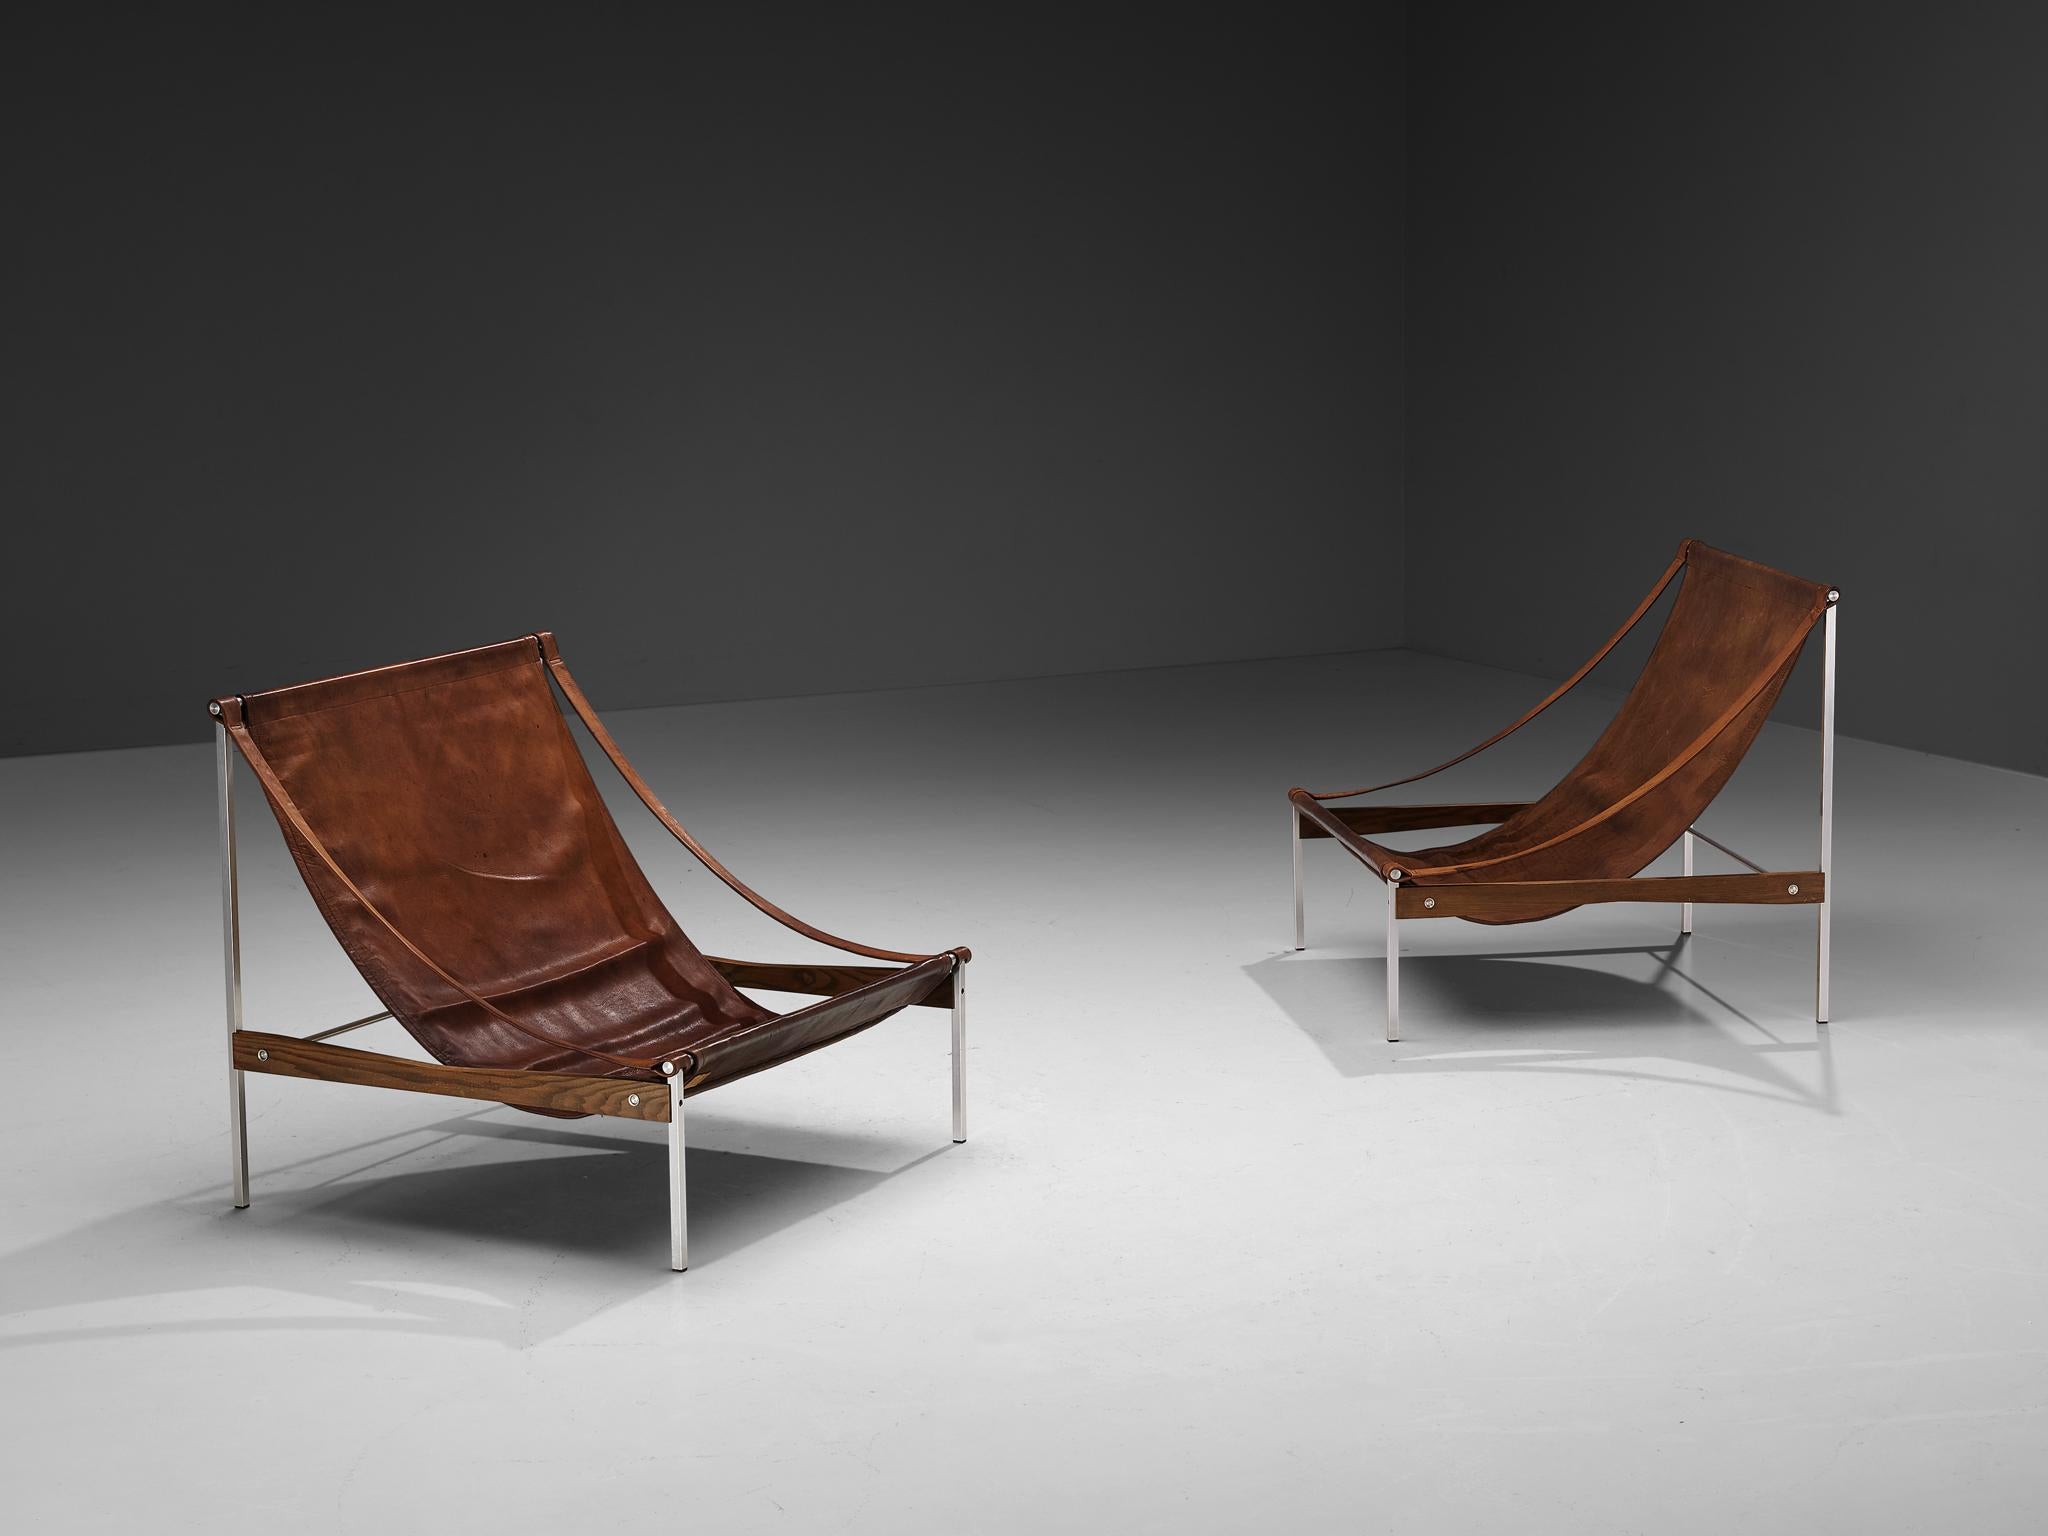 Stig Poulsson, pair of lounge chairs, model 'Bequem', leather, aluminum, ash, Denmark, designed 1968-1969

This 'Bequem' lounge chair is designed by Stig Poulsson. The most striking feature of this extraordinary chair is its sheer size. The width of